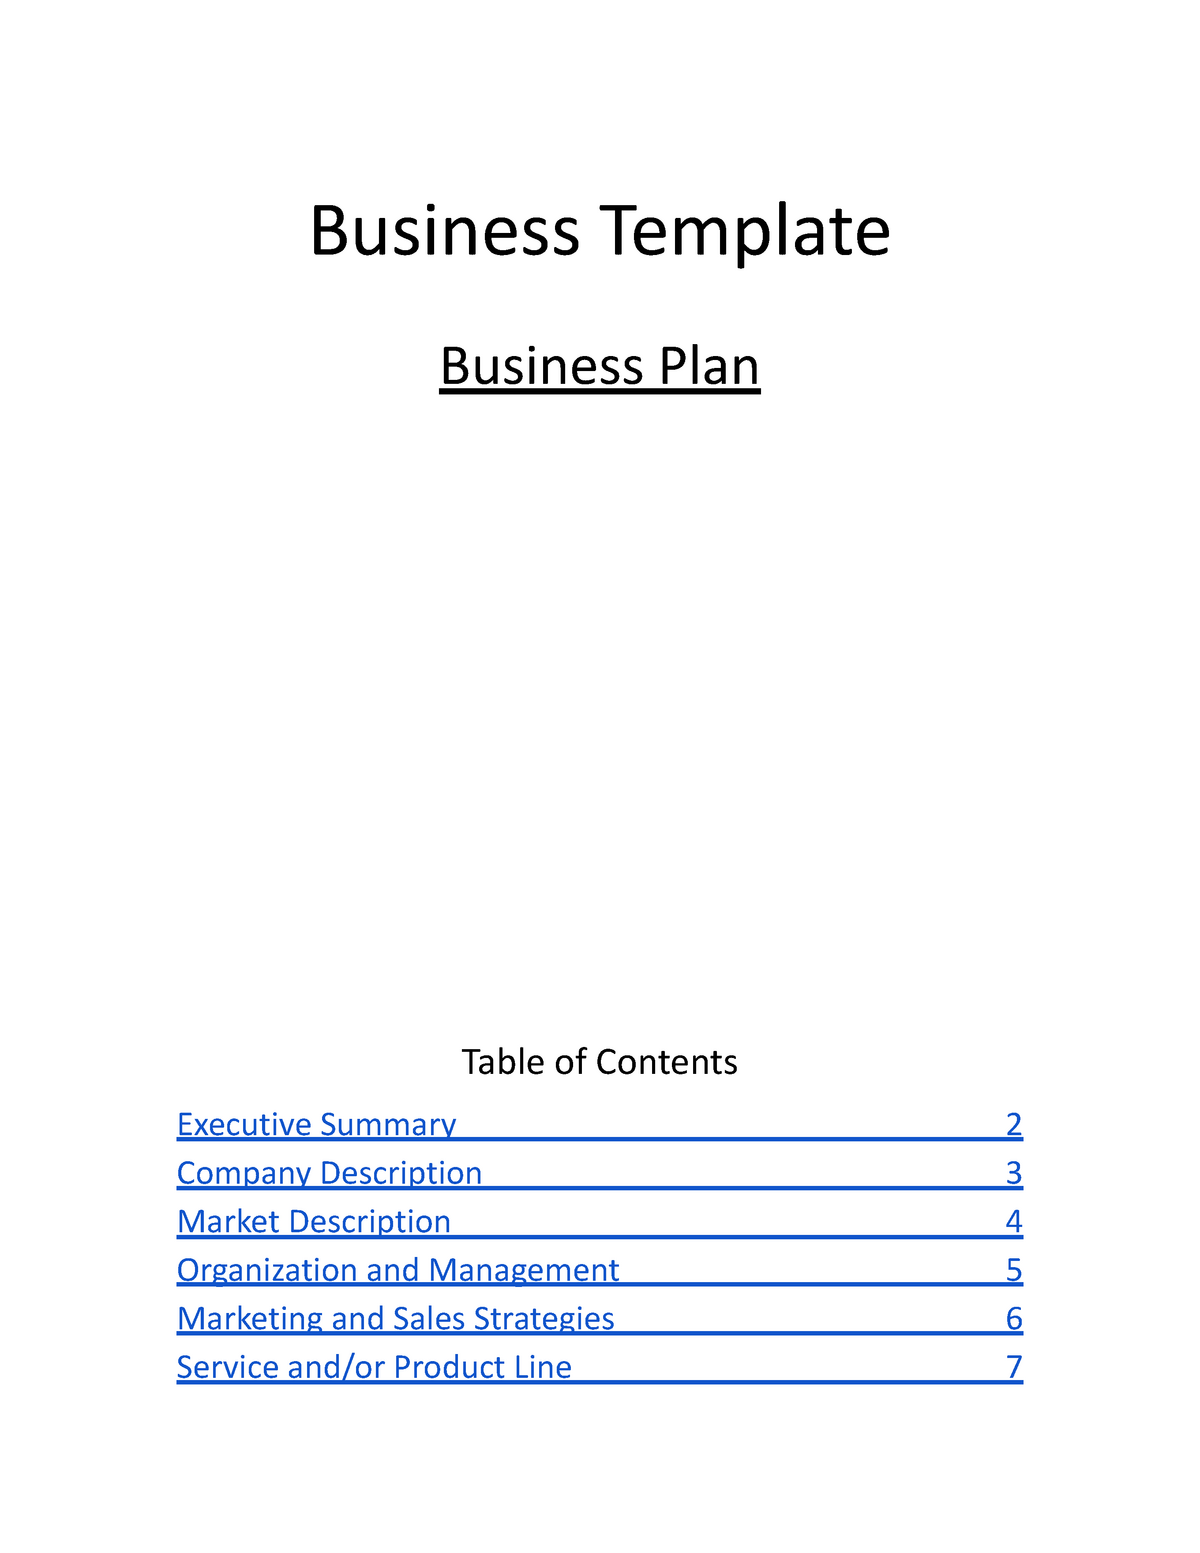 business plan for food supply company